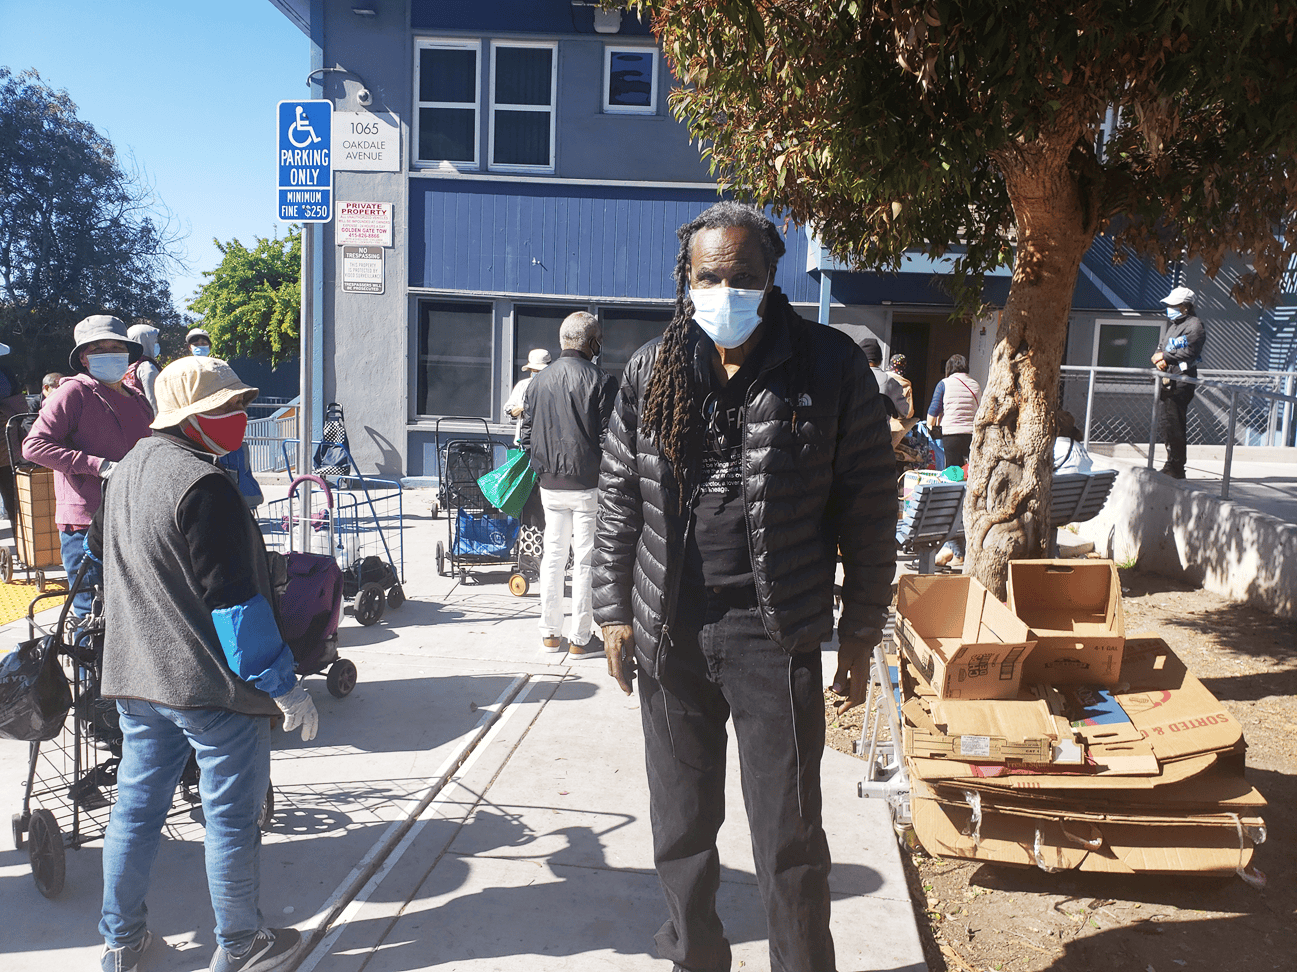 Claude-Carpenter-helps-with-the-line-outside-the-community-center, Struggling for multicultural unity in Bayview Hunters Point, Local News & Views 